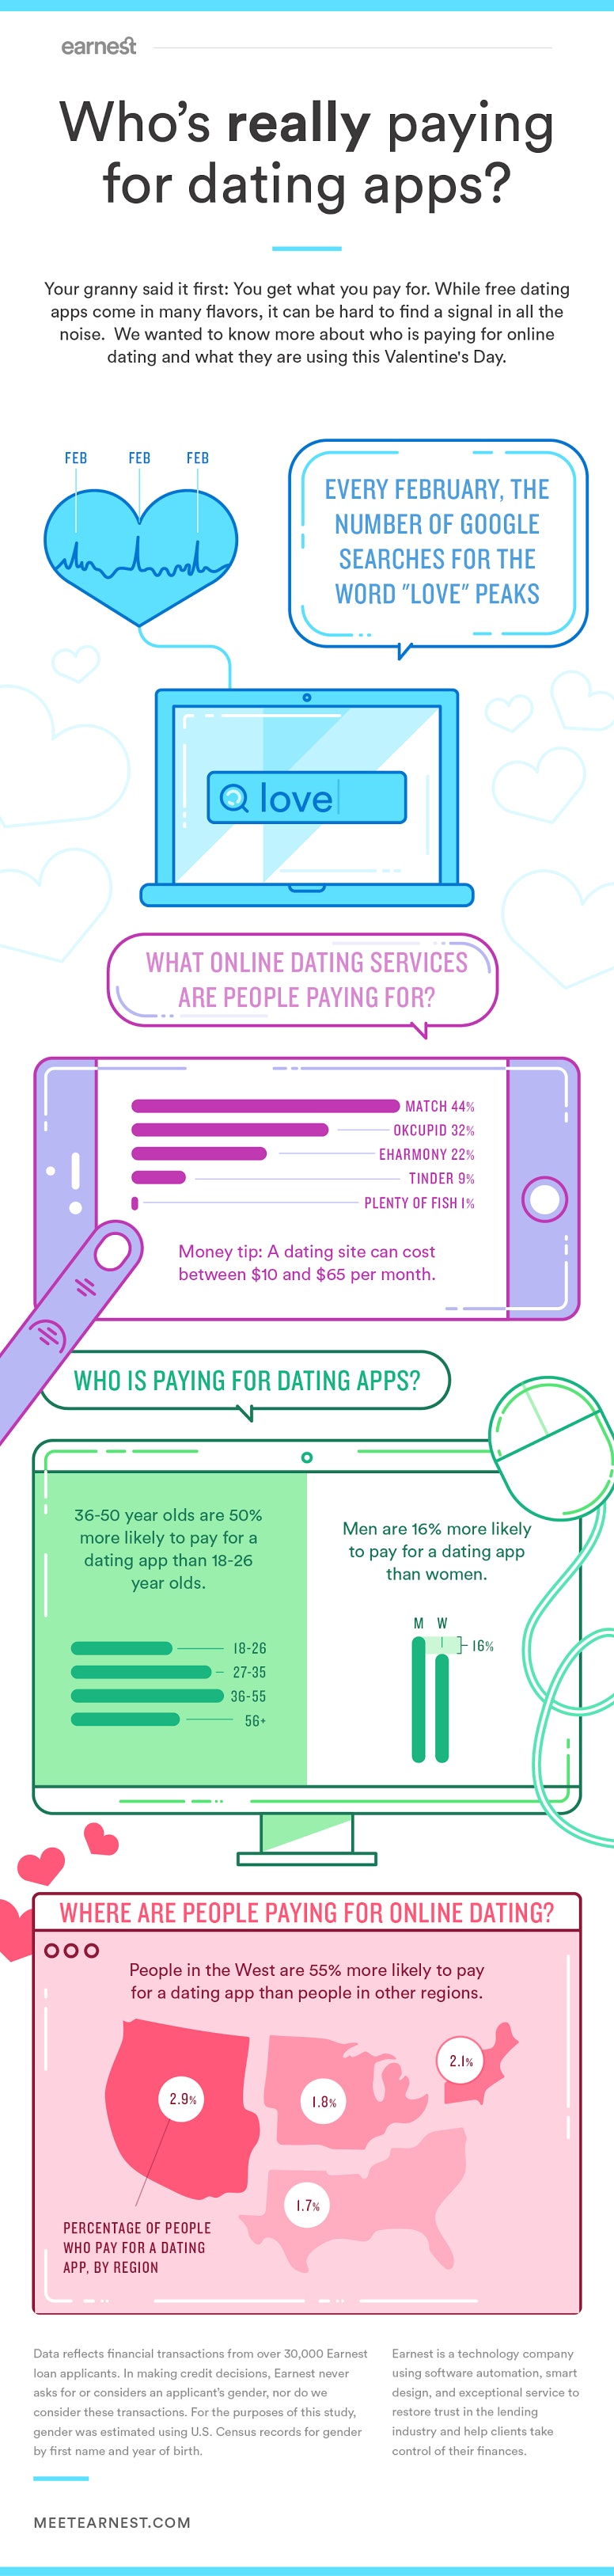 do you have to pay for dating apps